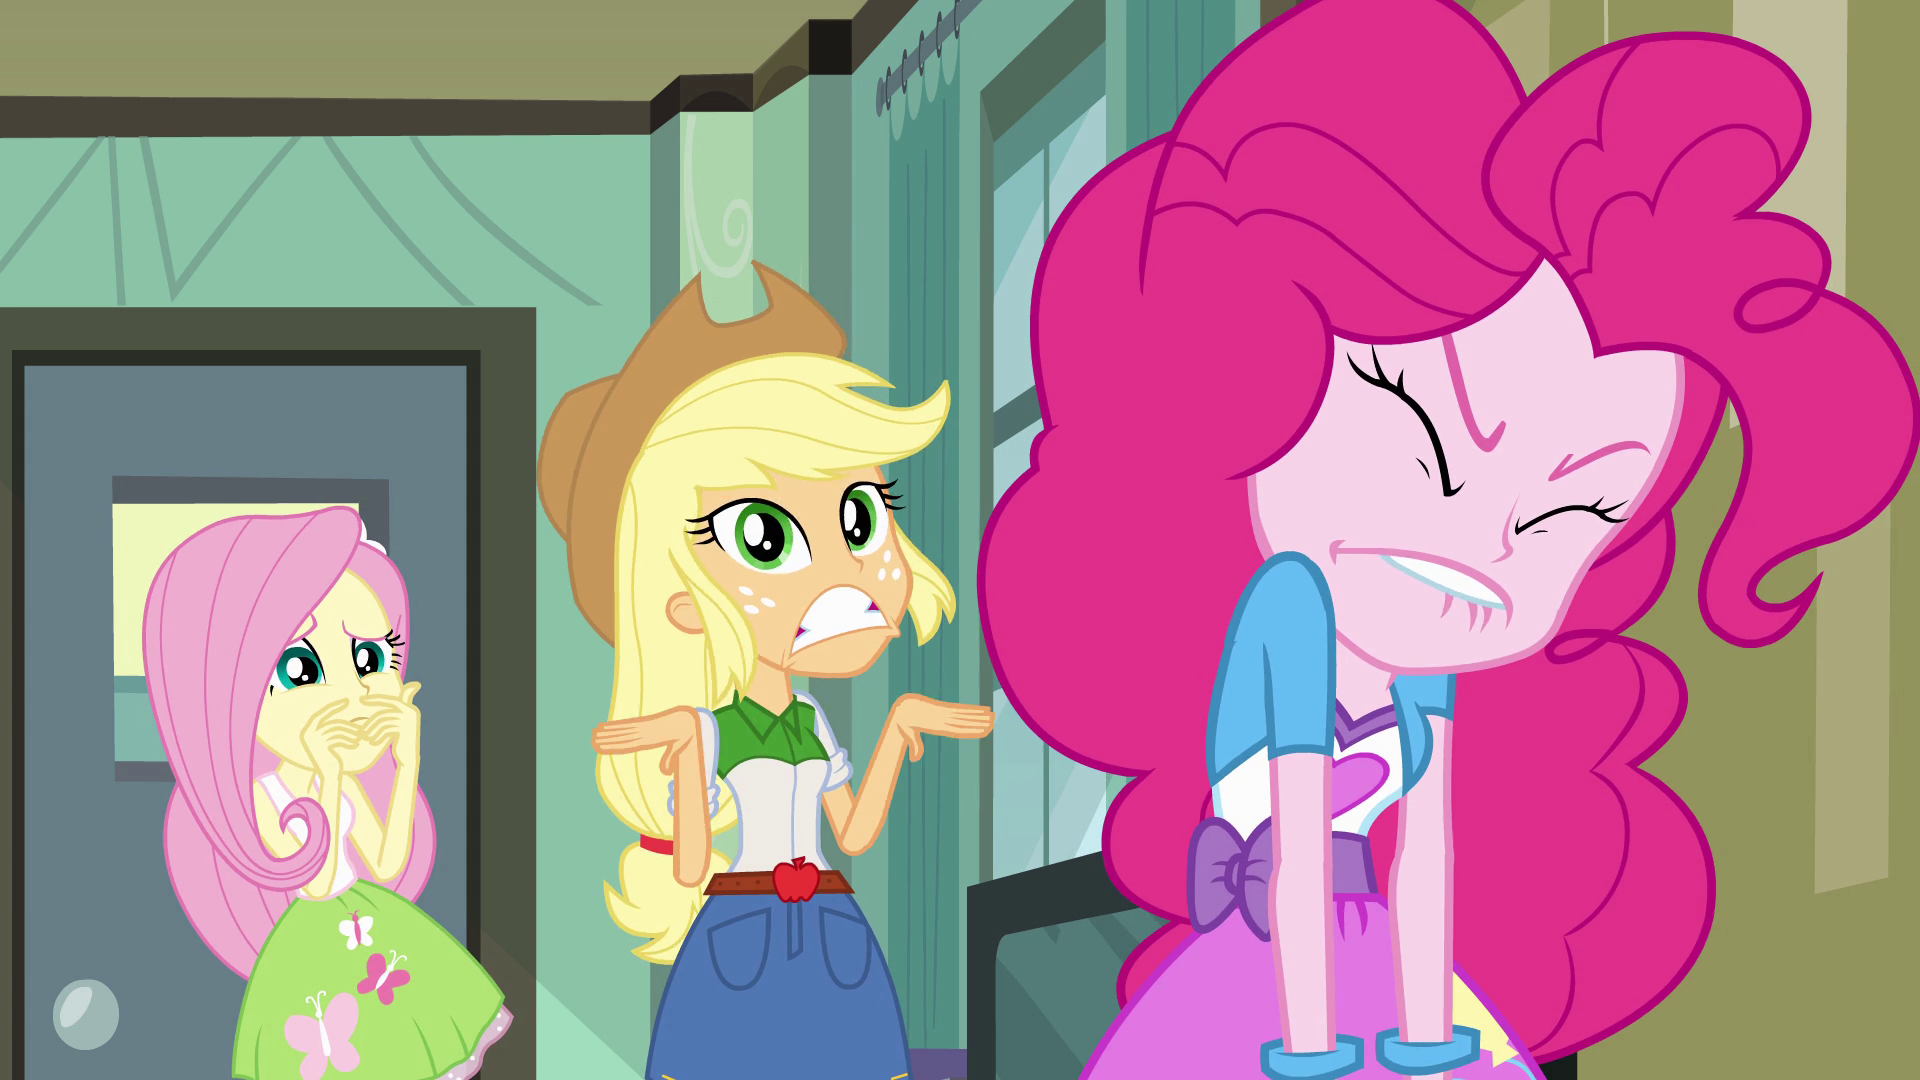 http://img2.wikia.nocookie.net/__cb20130725053616/mlp/images/4/4f/Pinkie_Pie_losing_her_temper_EG.png